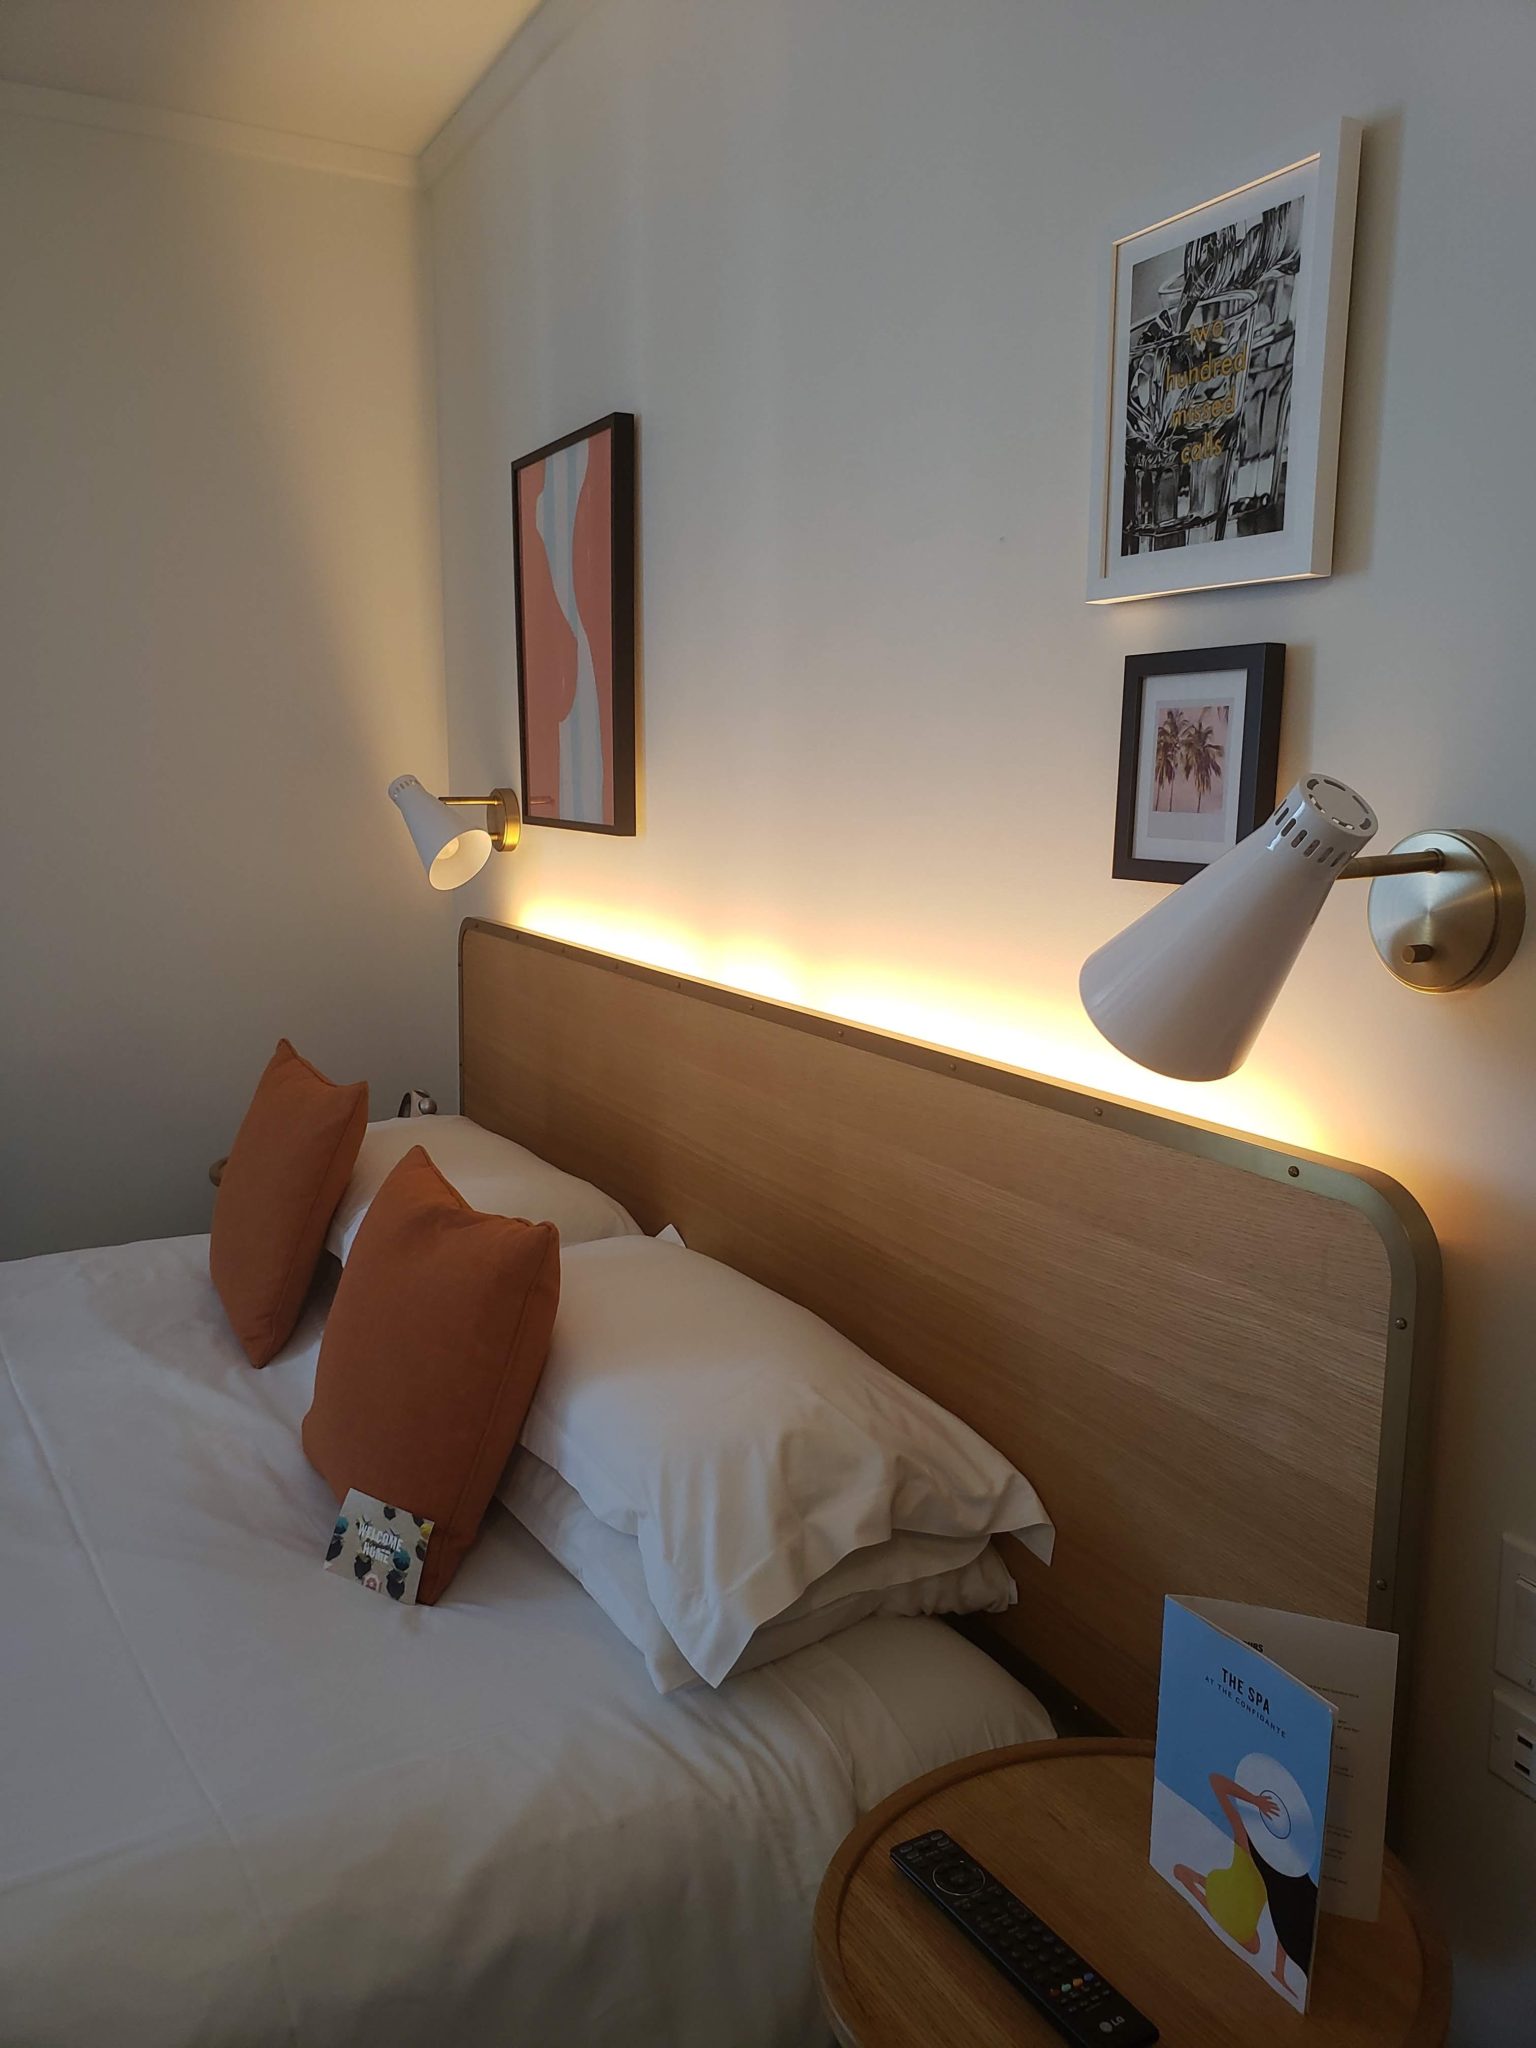 a bed with pillows and a lamp on the wall